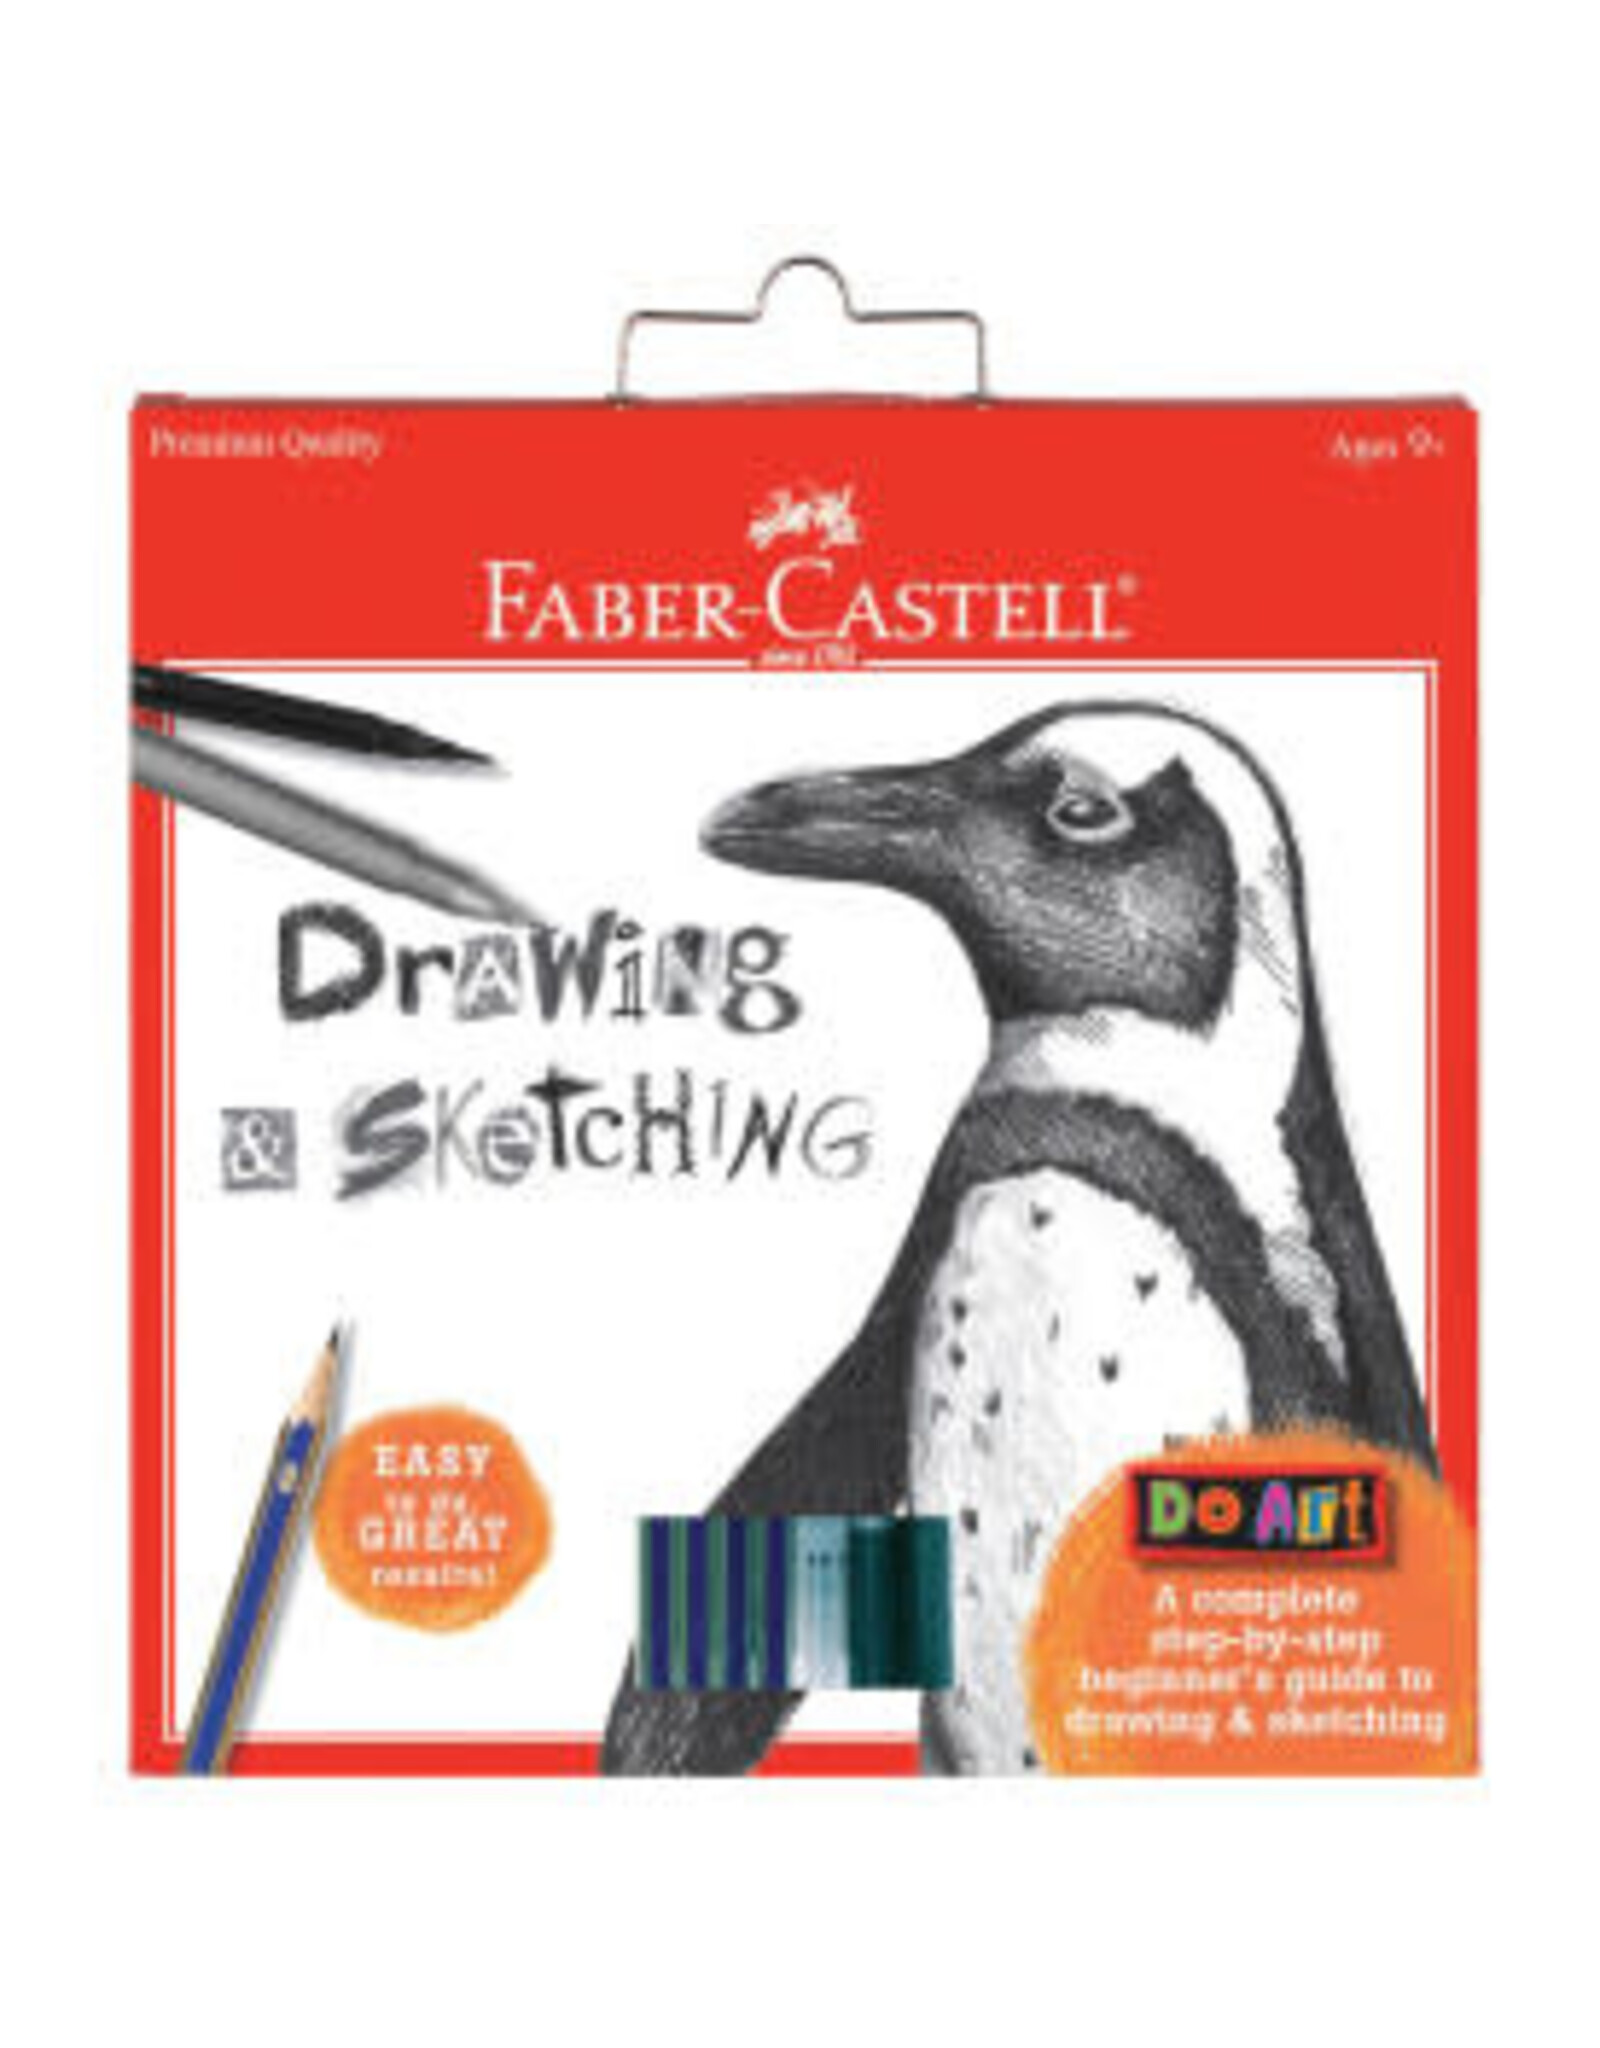 Faber-Castell Do Art Drawing & Sketching